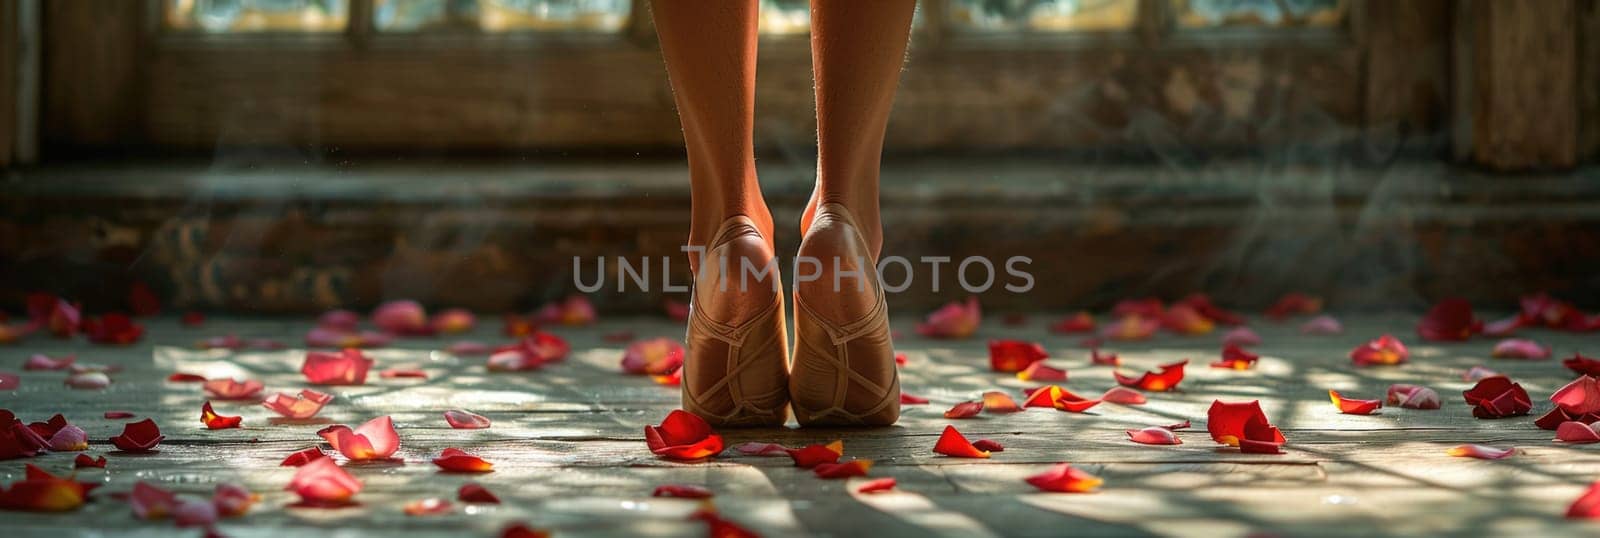 A womans legs in high heels standing amidst a scattering of rose petals.